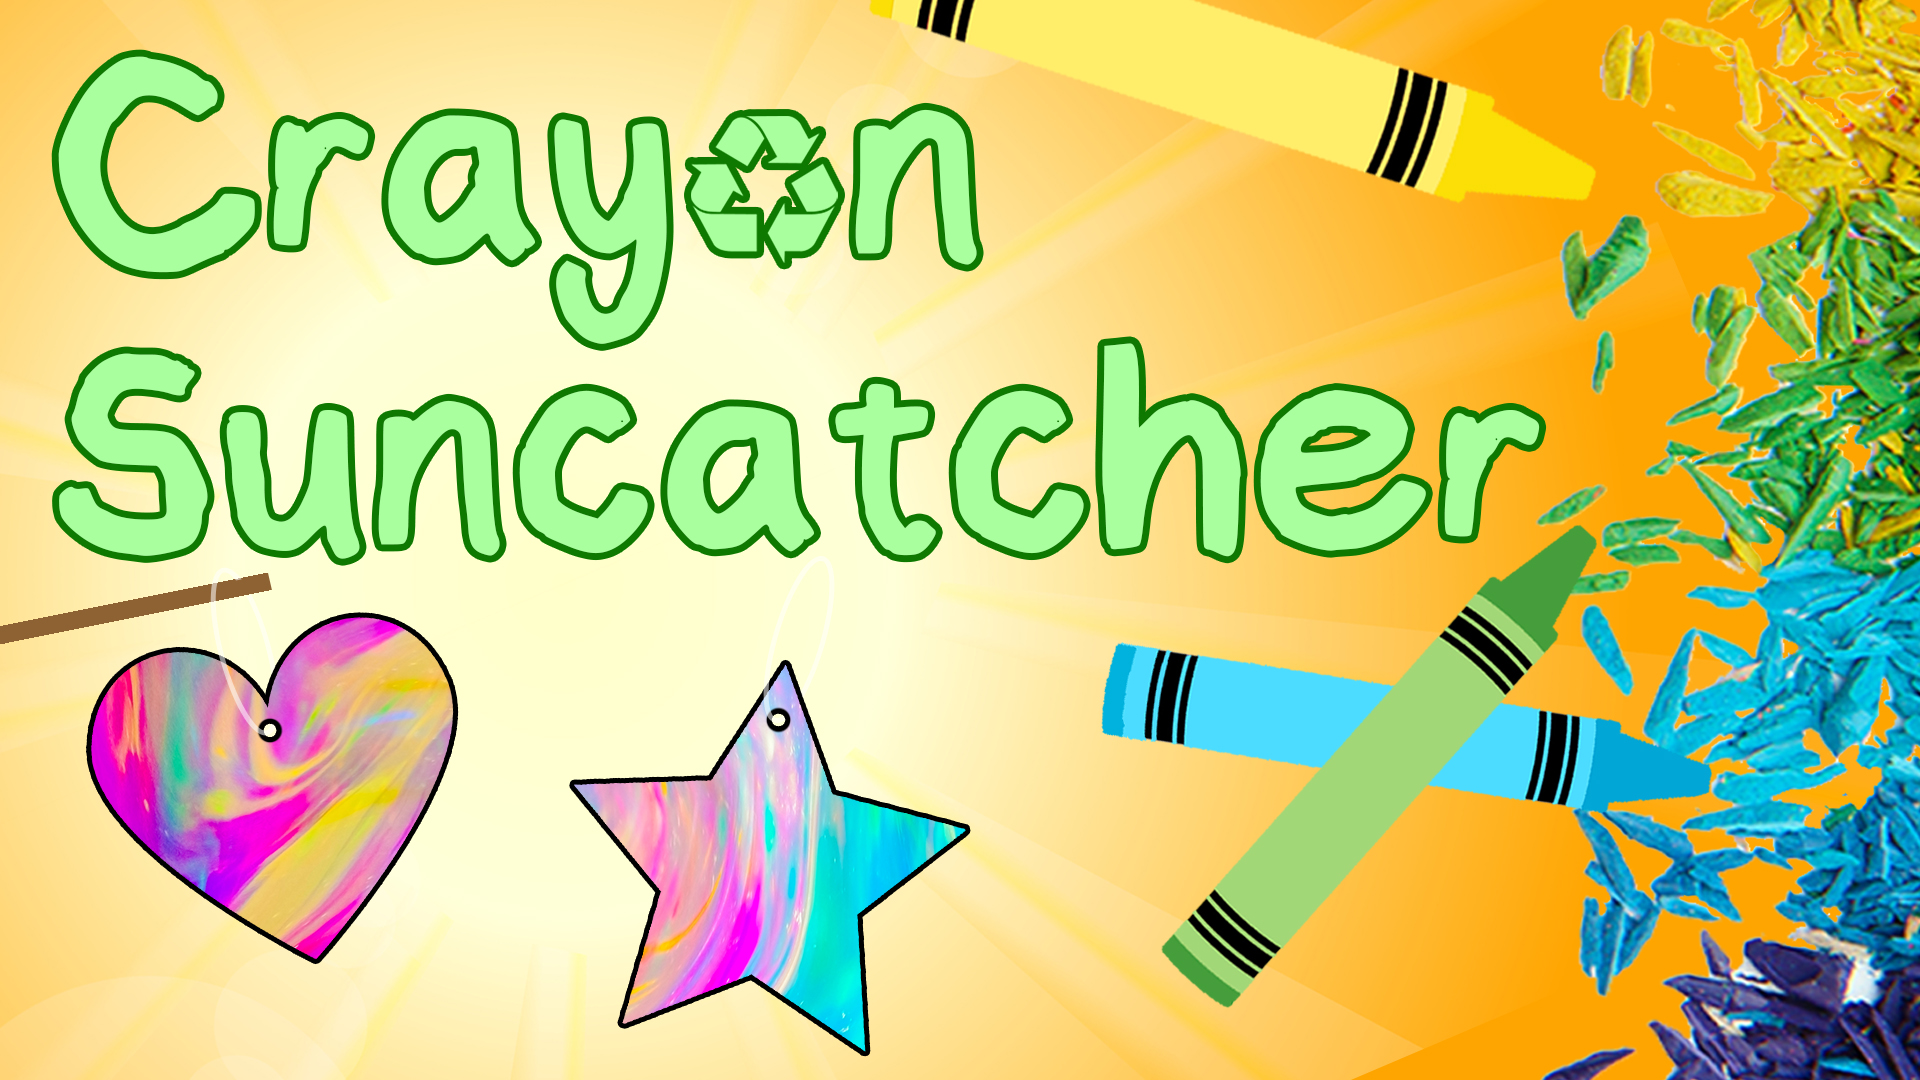 Image reads "Crayon Suncatcher" against a yellow sunburst background. Crayons and crayon shavings are to the right of the title. A heart and a star marble suncatcher are under the title.